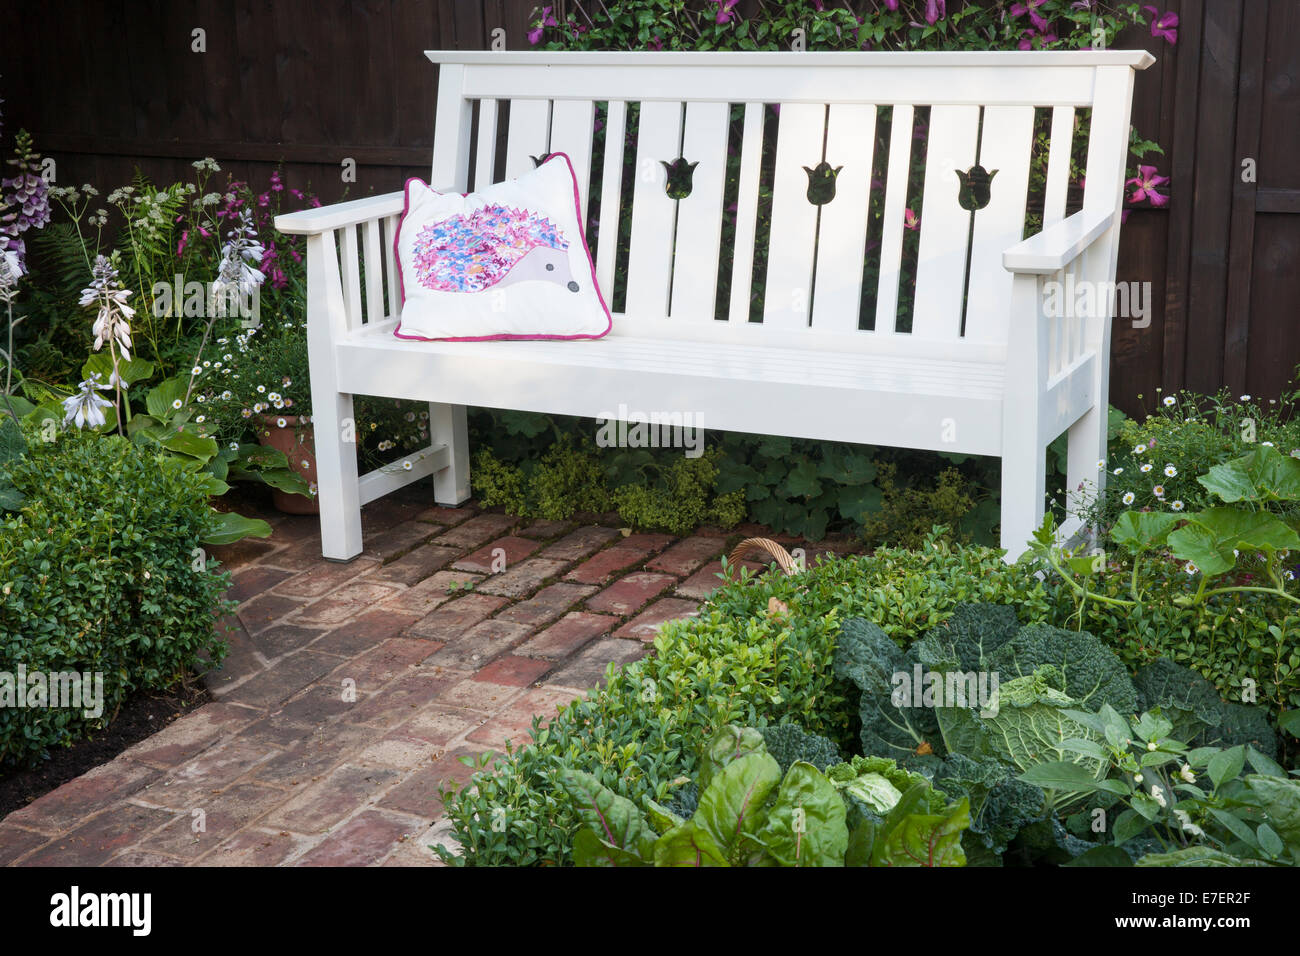 Garden - Hedgehog Garden - view of garden bench brick paving and box hedge with savoy cabbage chard and squash Stock Photo